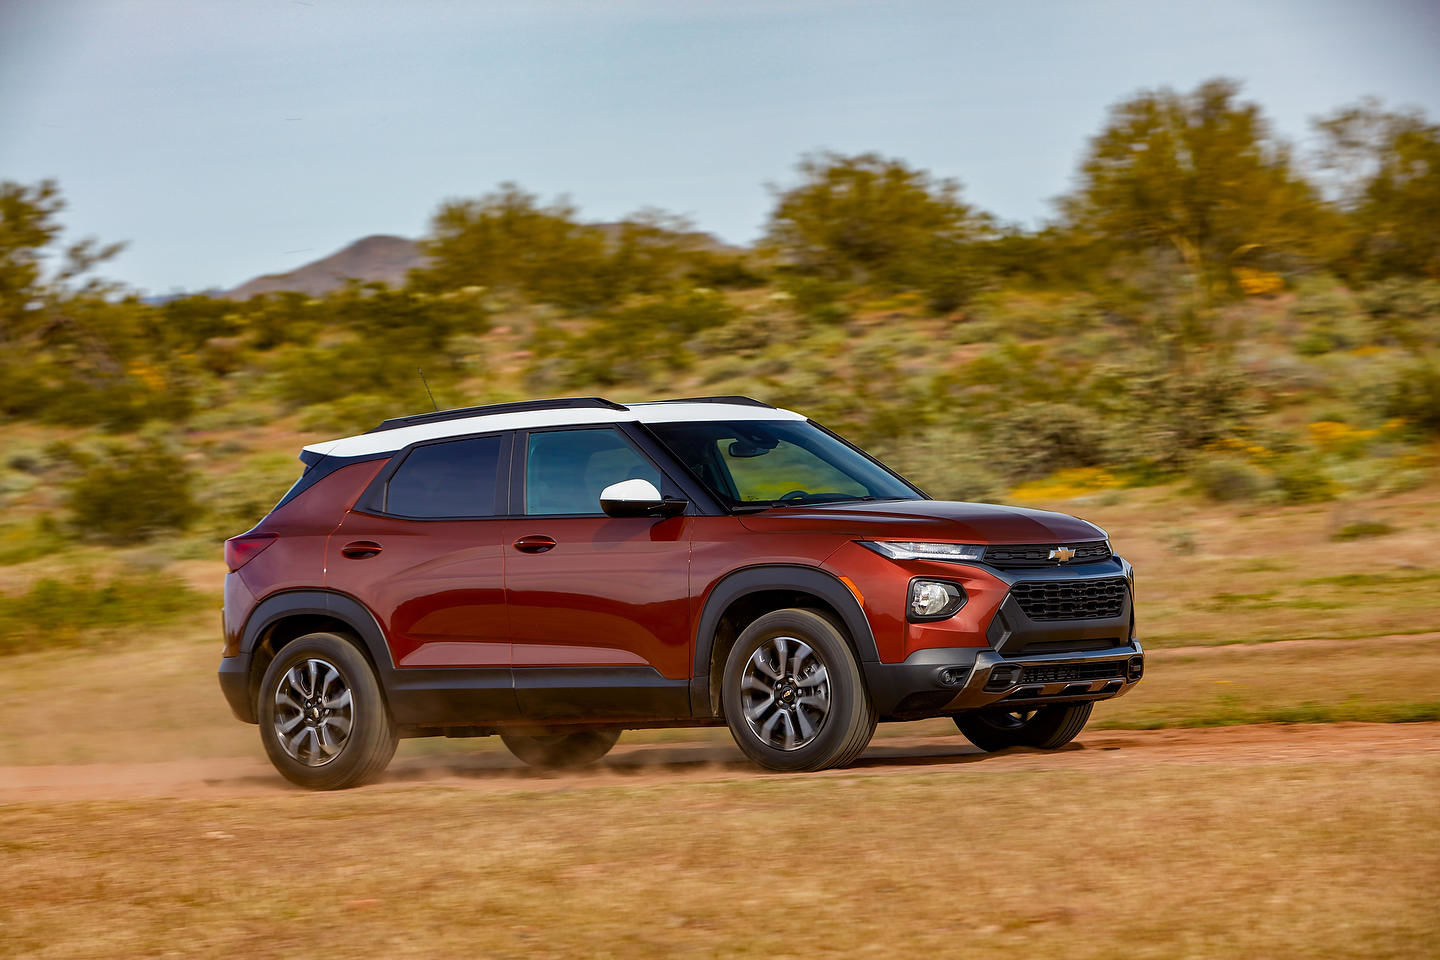 The New 2021 Chevrolet Trailblazer is ready for winter